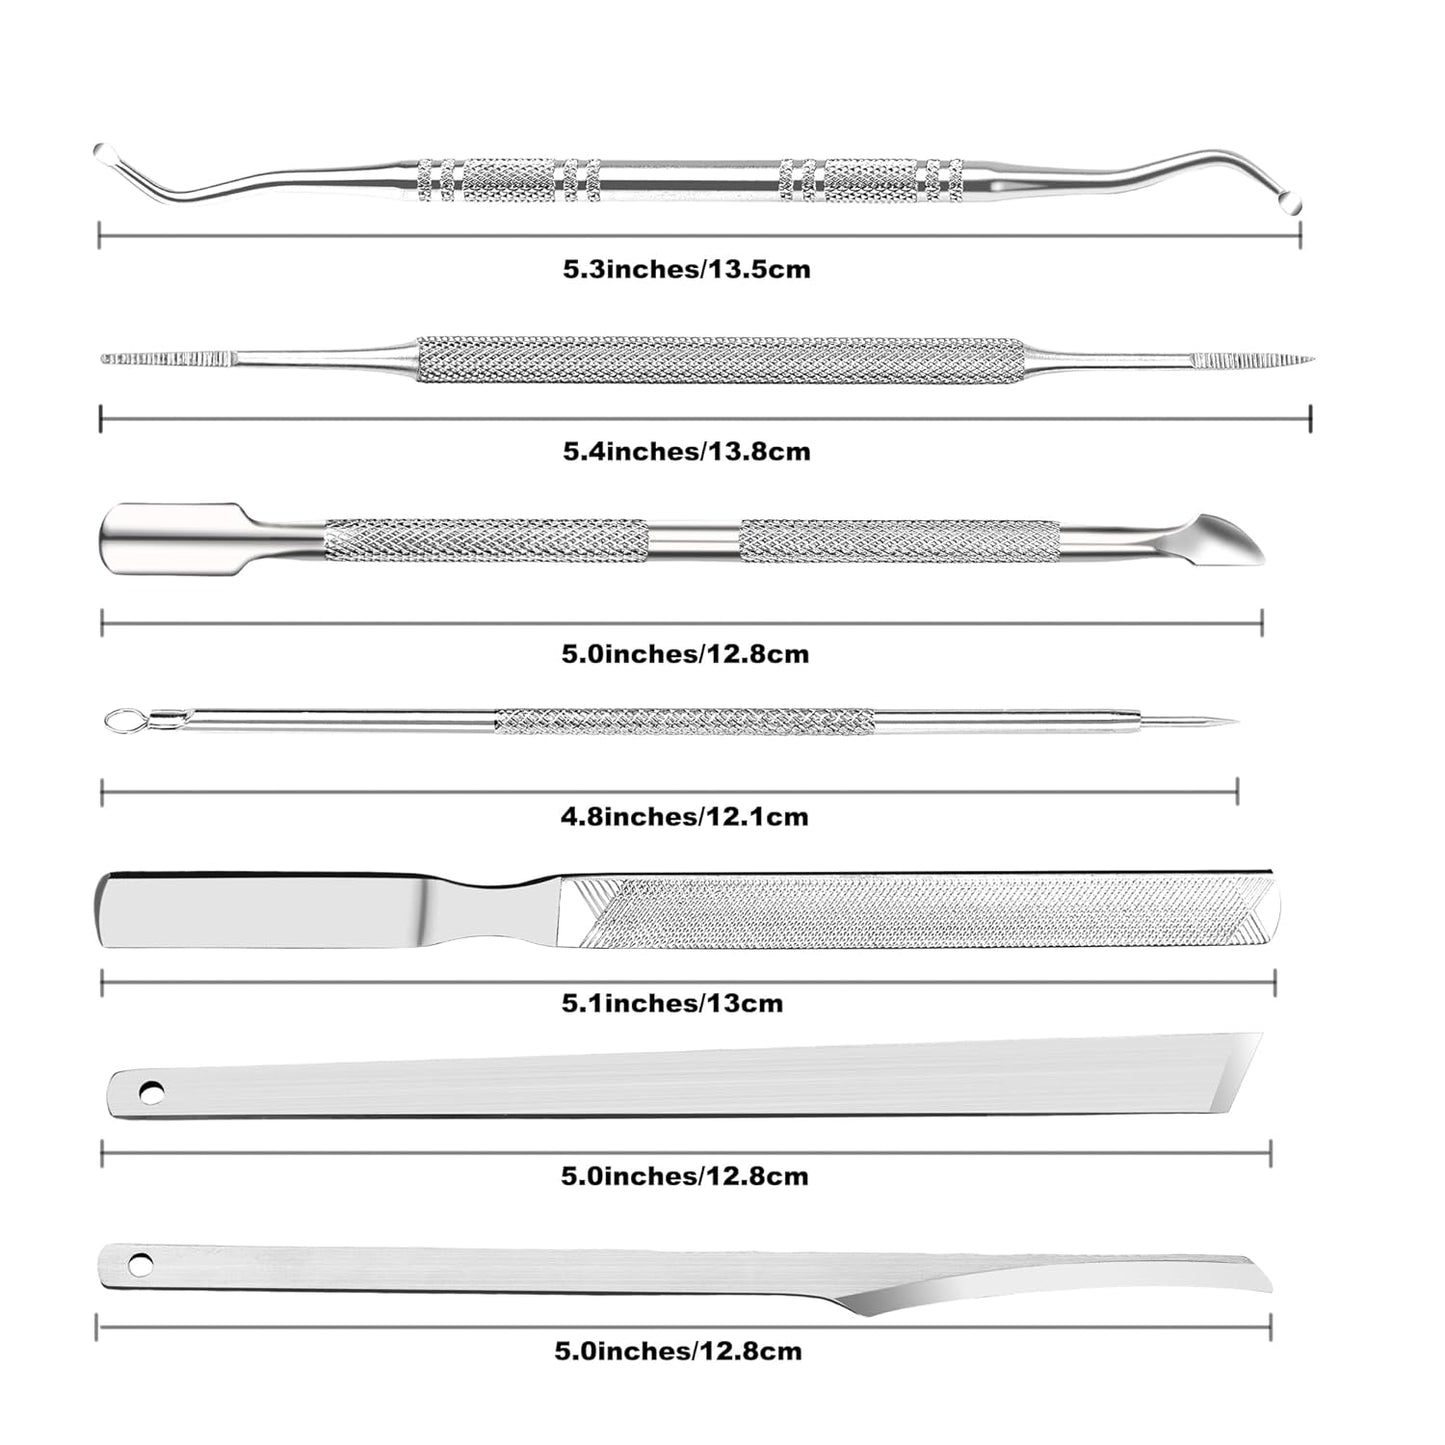 7 Pcs Ingrown Toenail File and Lifters Set, Stainless Steel Ingrown Toenail Removal Kit, Manicure Treatment under Nail Cleaner Pedicure Tools